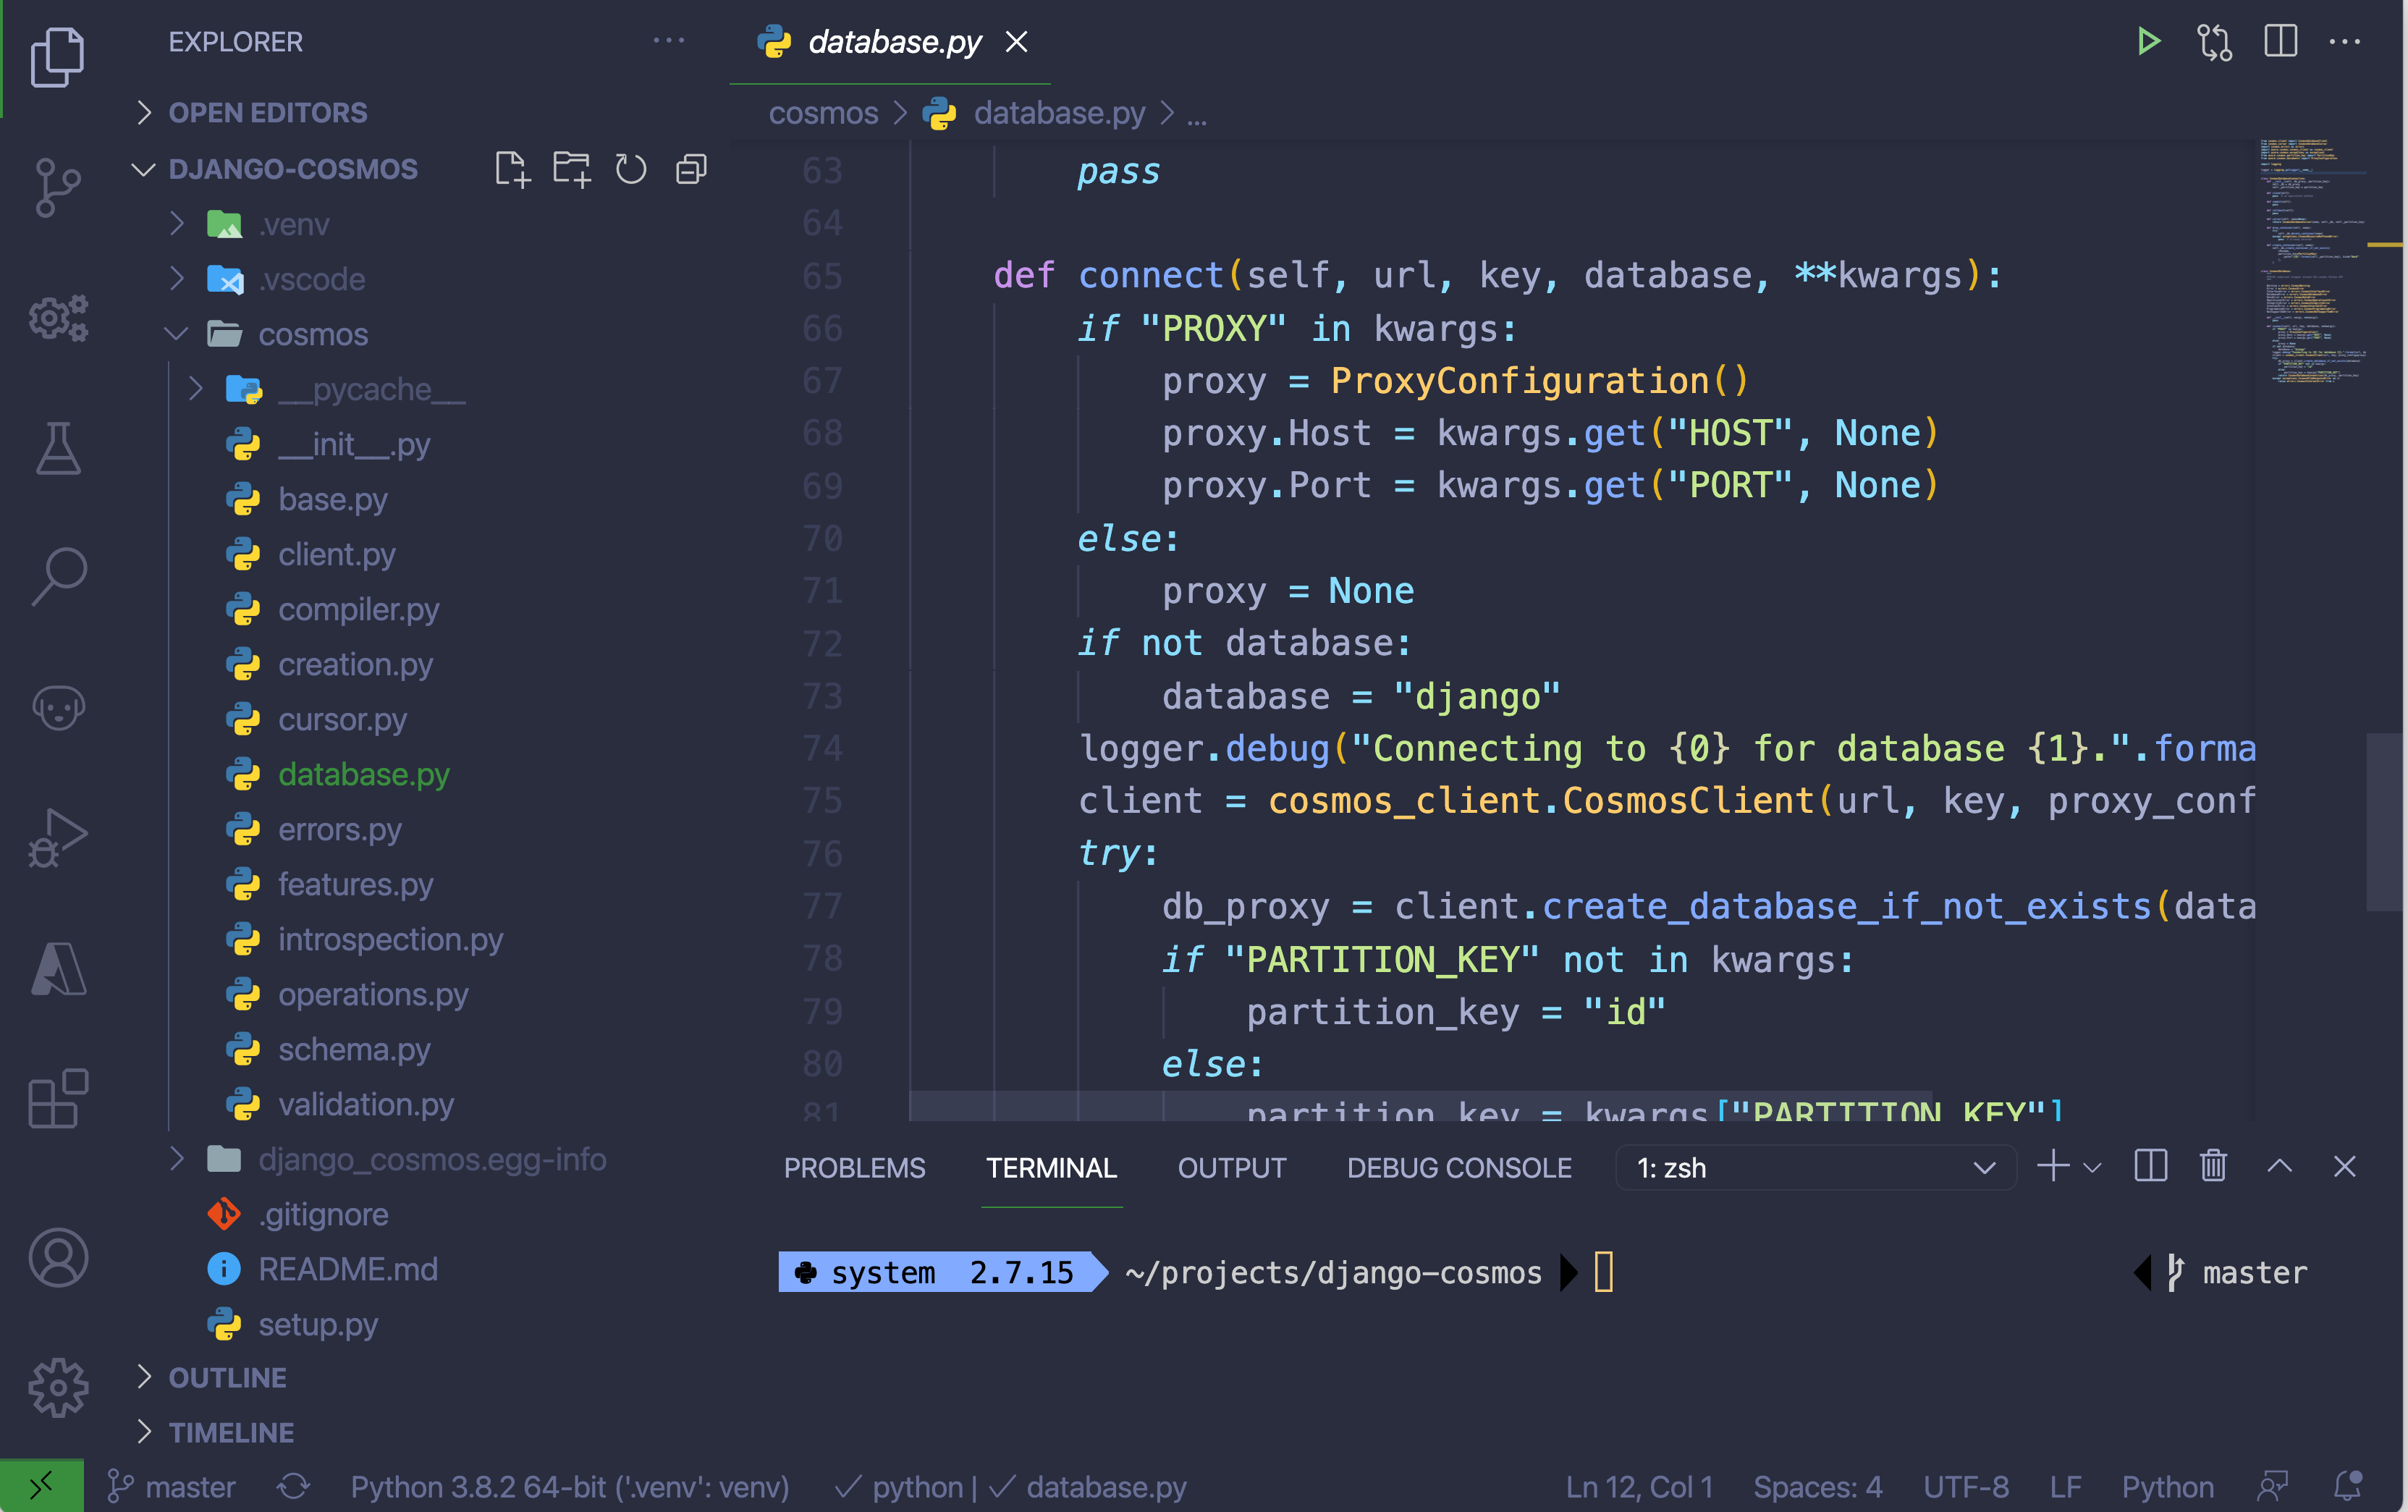 VS Code with the pale night color theme